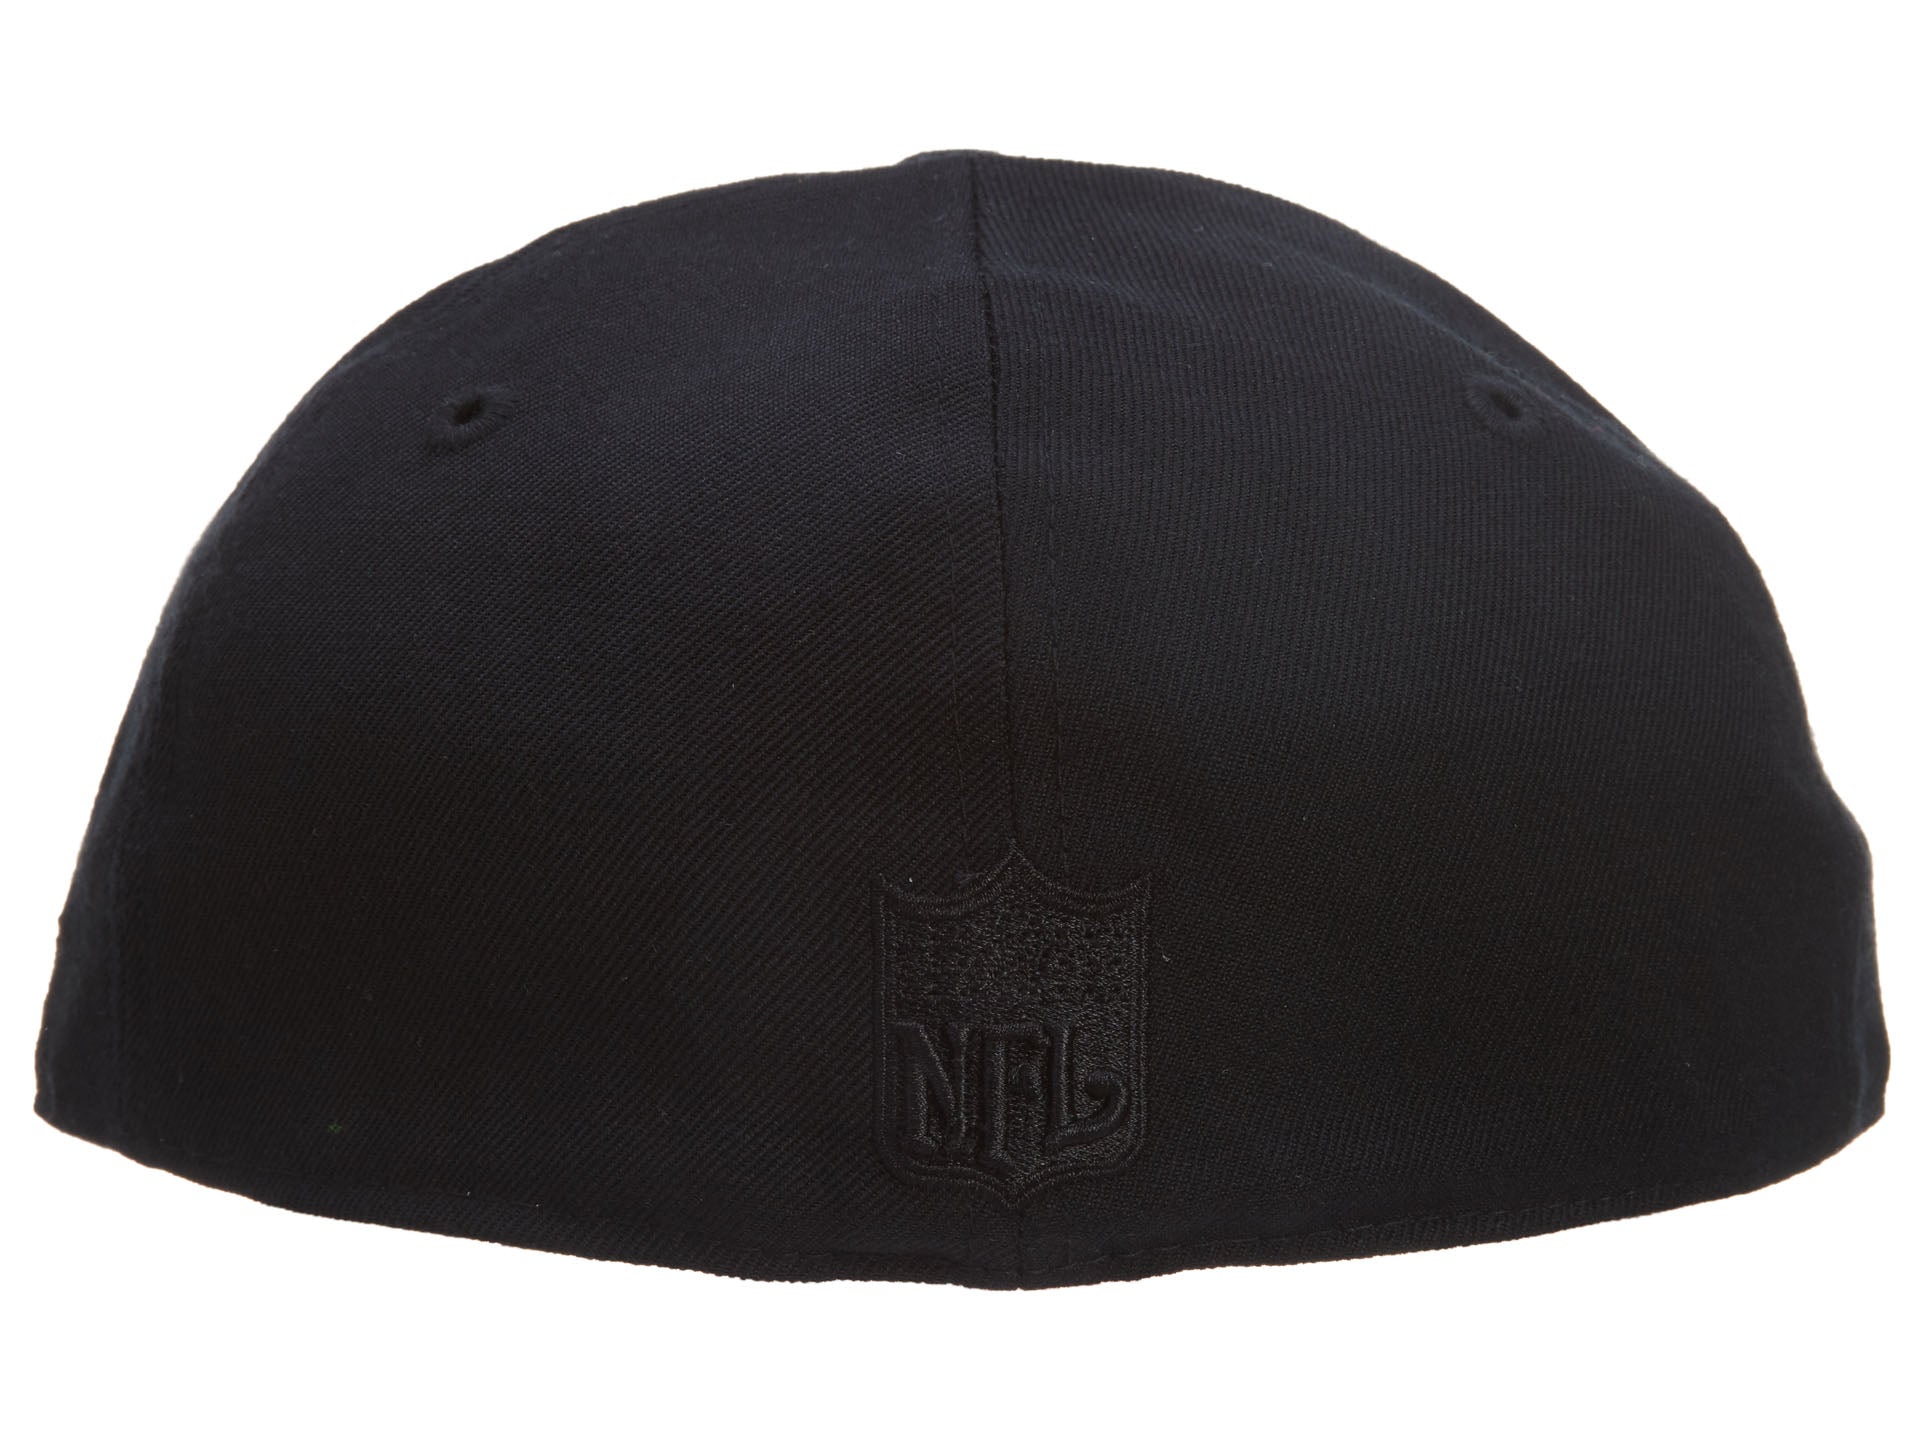 Reebok Ny Nfl Fitted Hat #25.00 Unisex Style : Hat1915